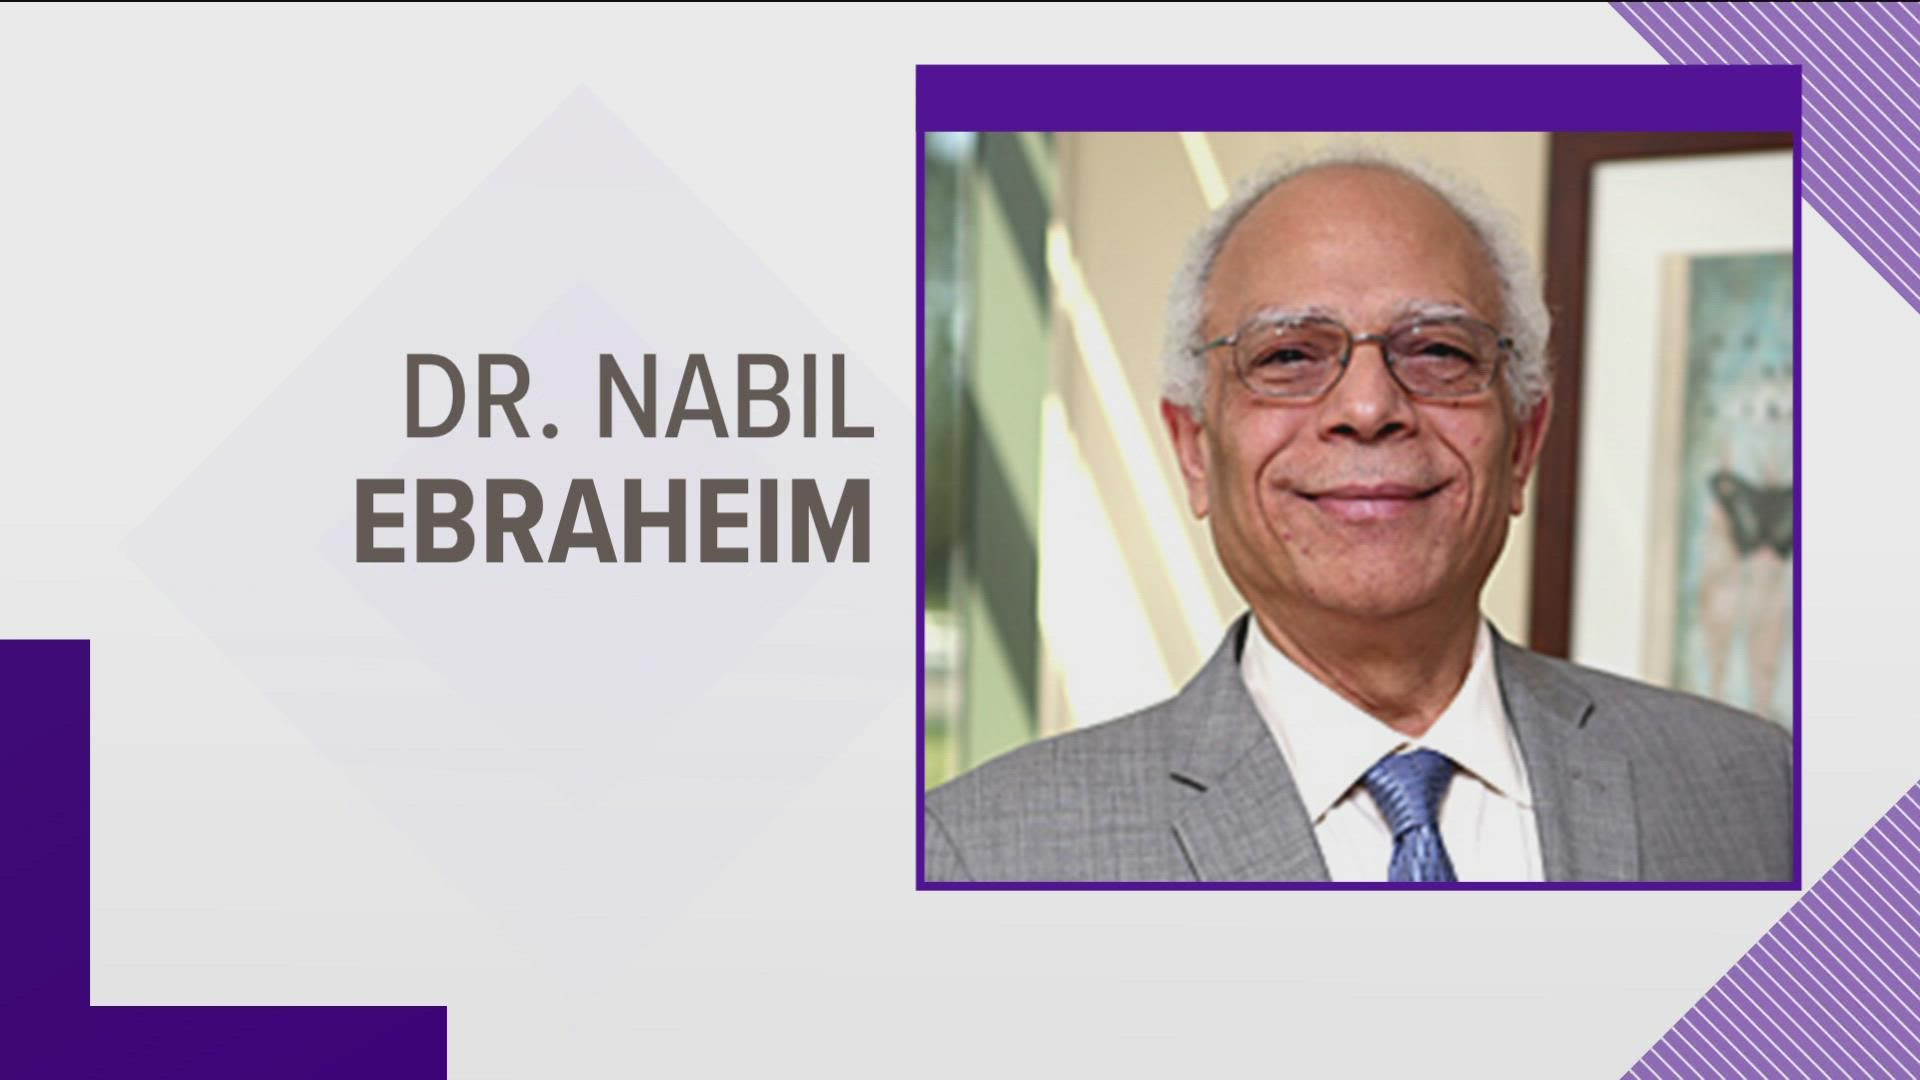 Nabil Ebraheim has been placed on paid leave by the hospital.